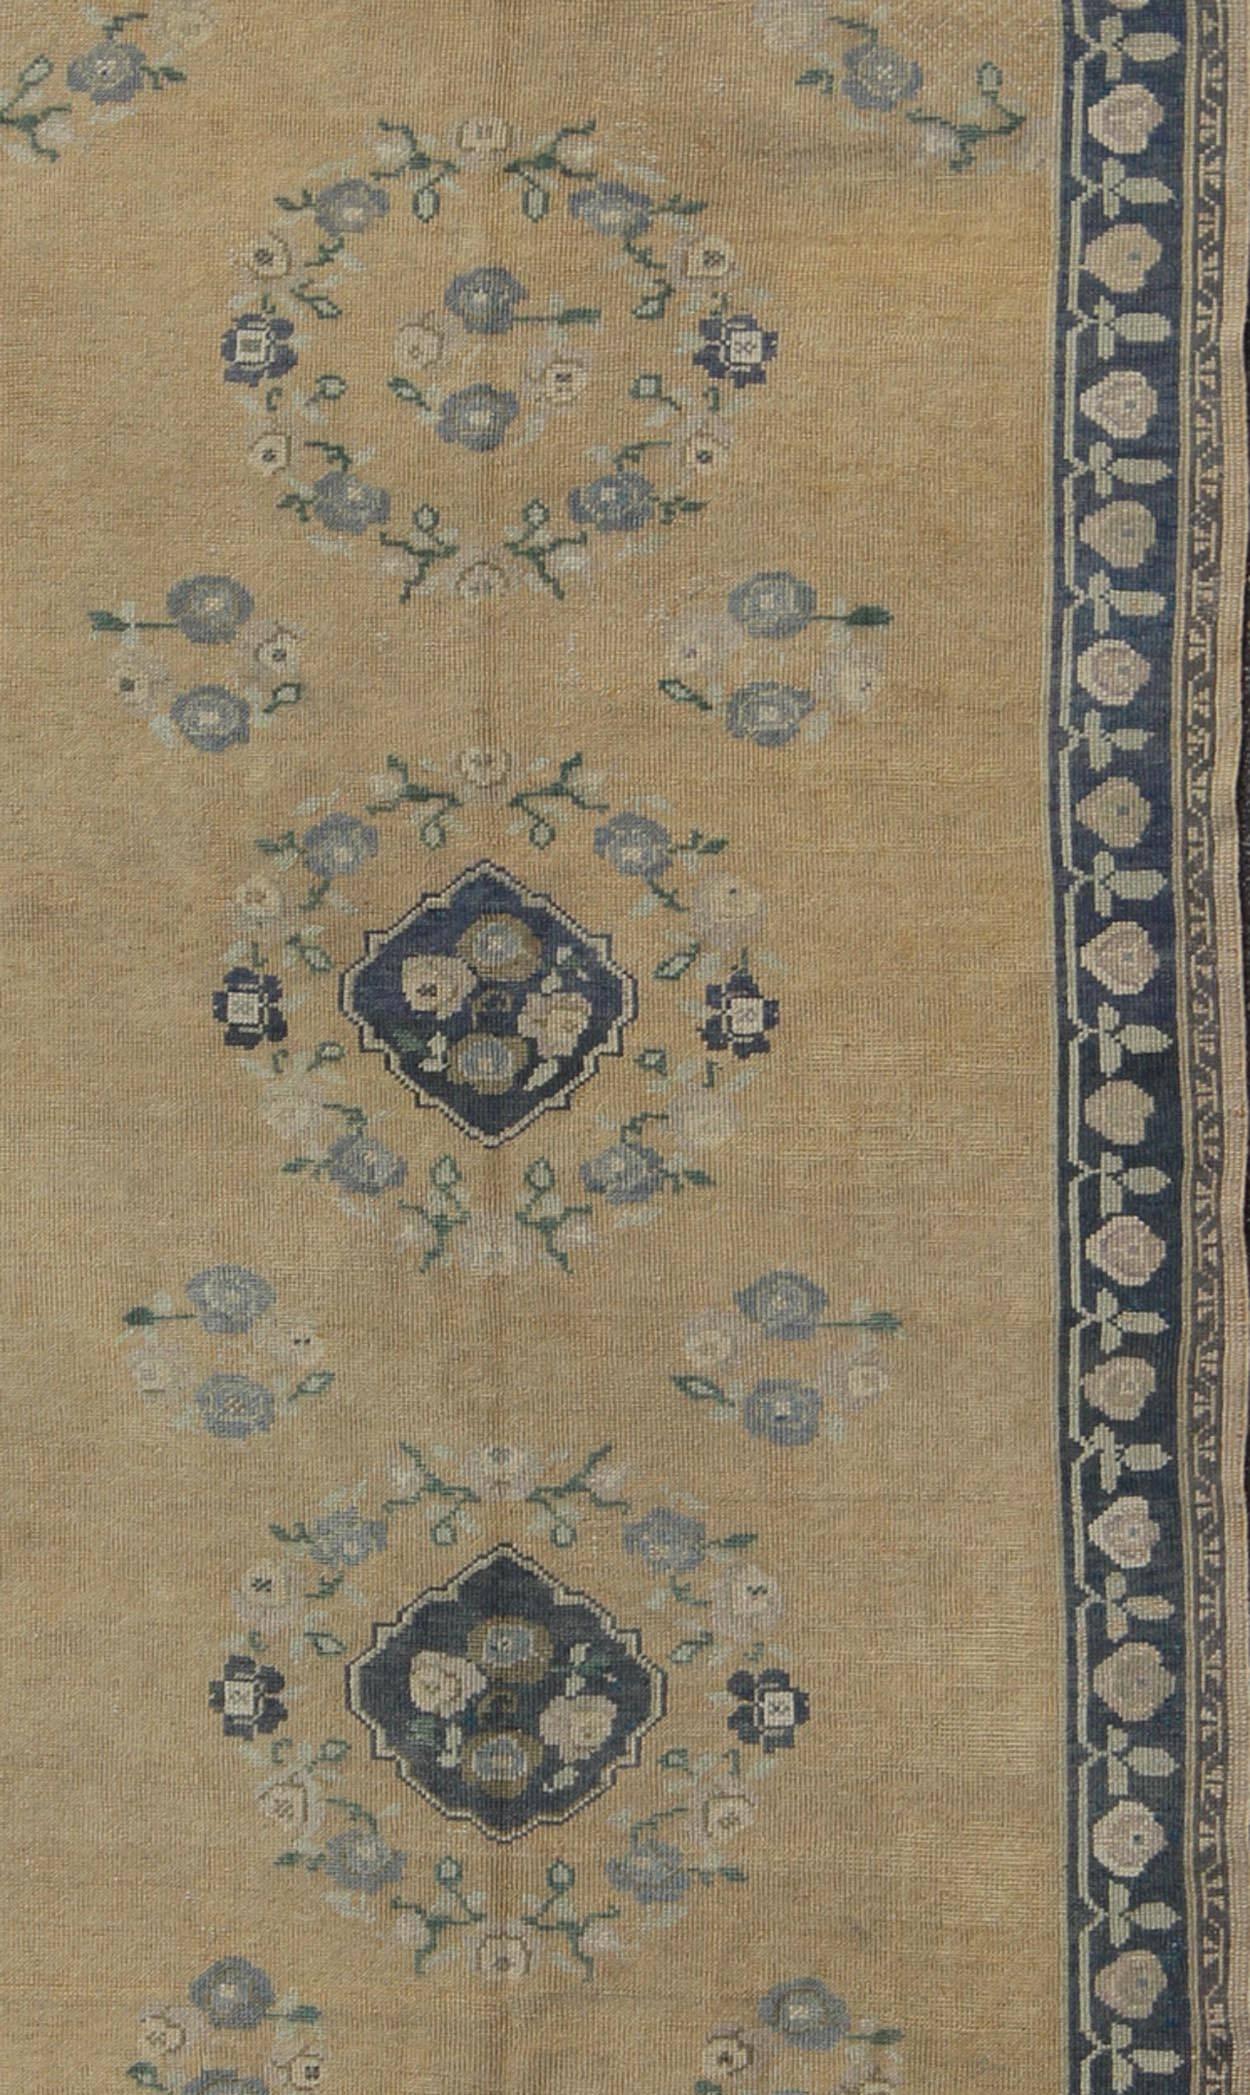 Hand-Knotted Oushak Gallery Rug from Mid-20th Century Turkey with Floral Design For Sale